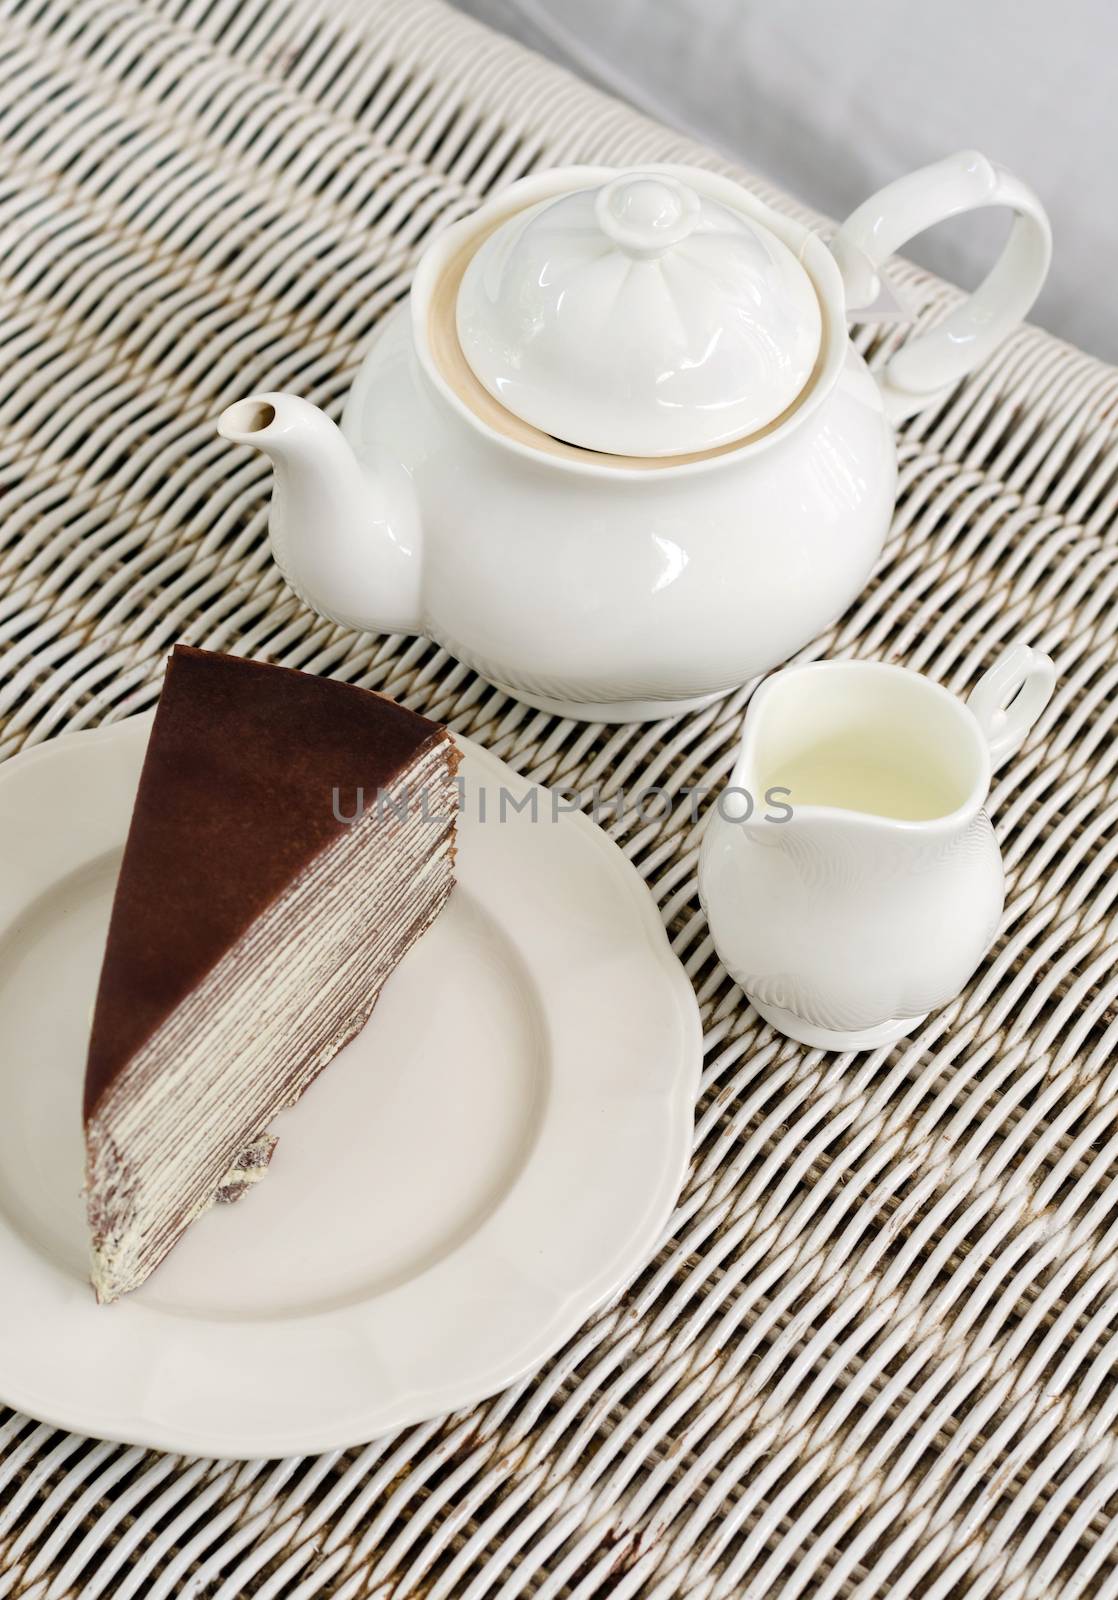 Afternoon tea with chocolate crape cake on weave texture